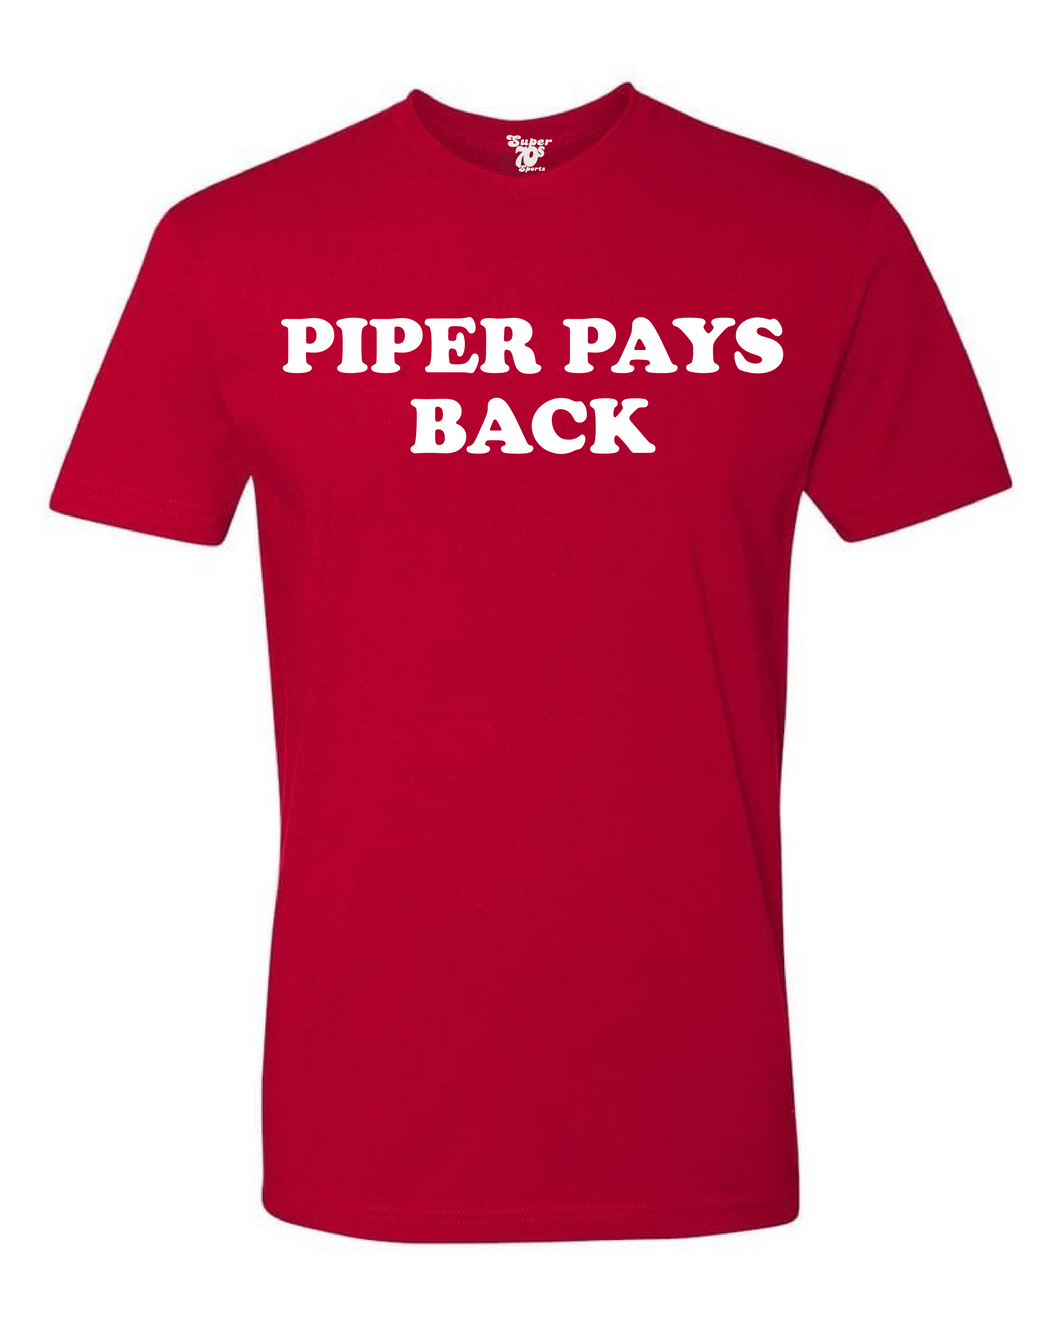 Piper Pays Back